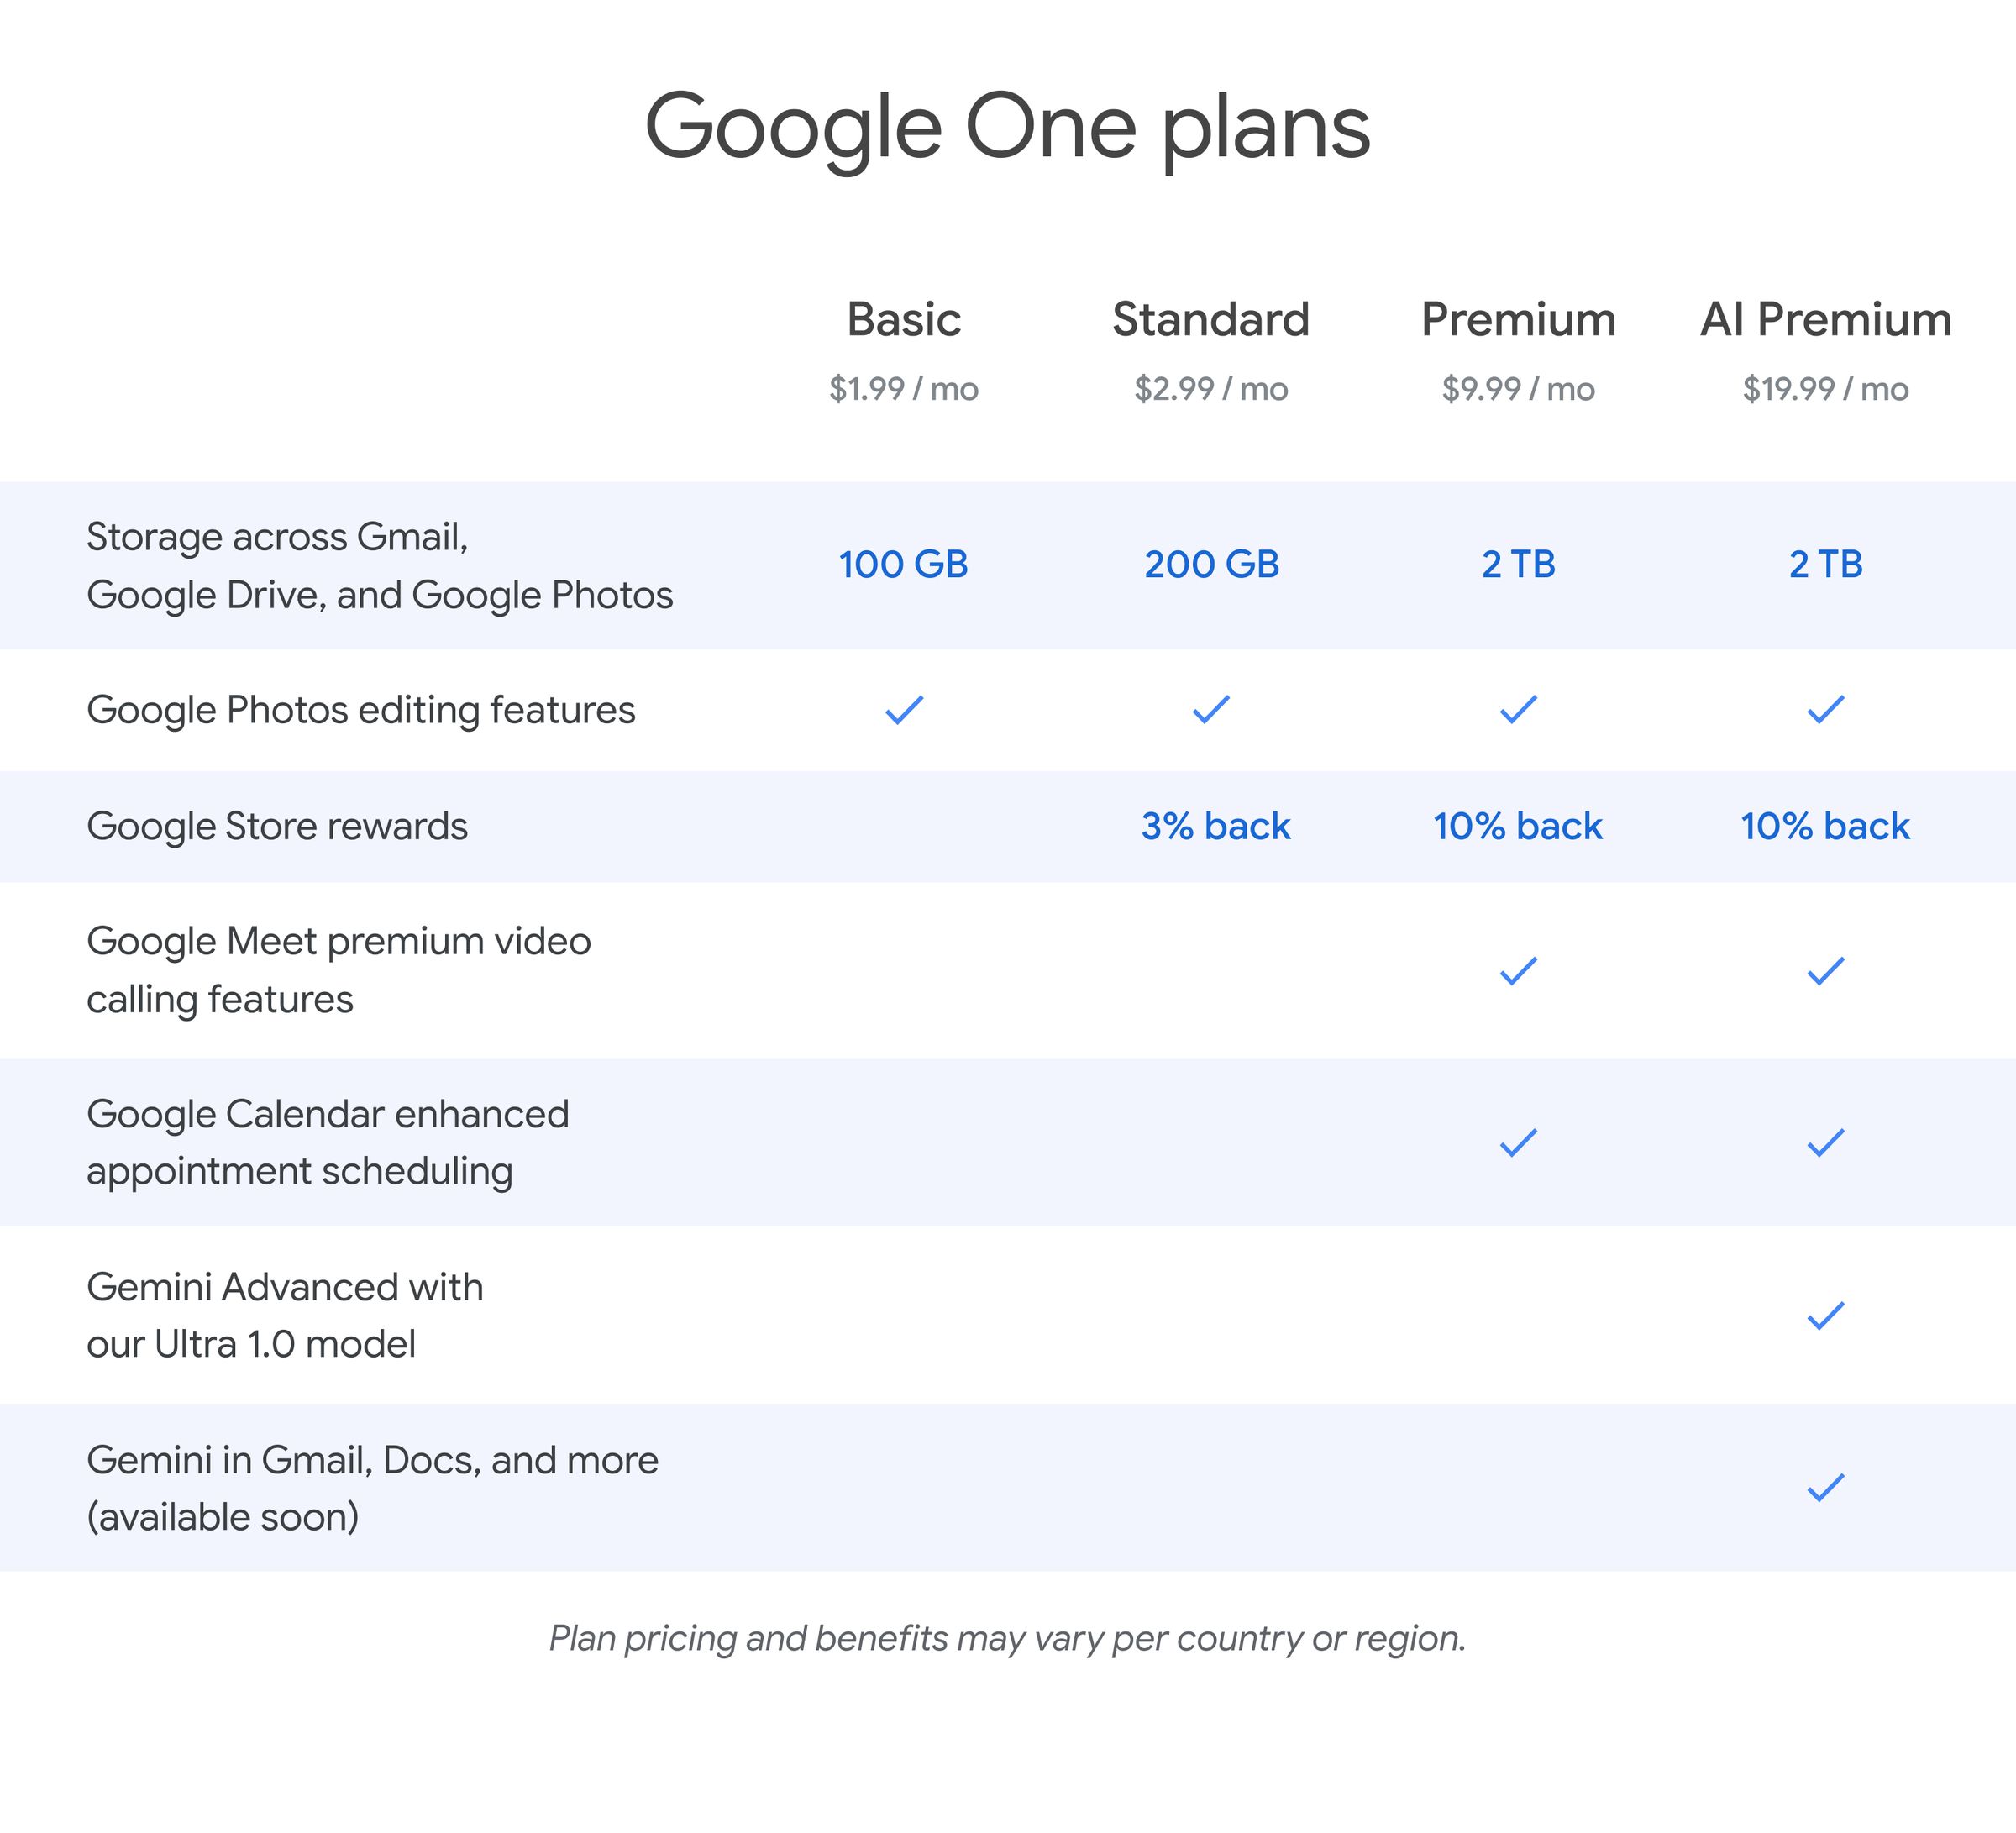 A screenshot showing the various Google One plans.